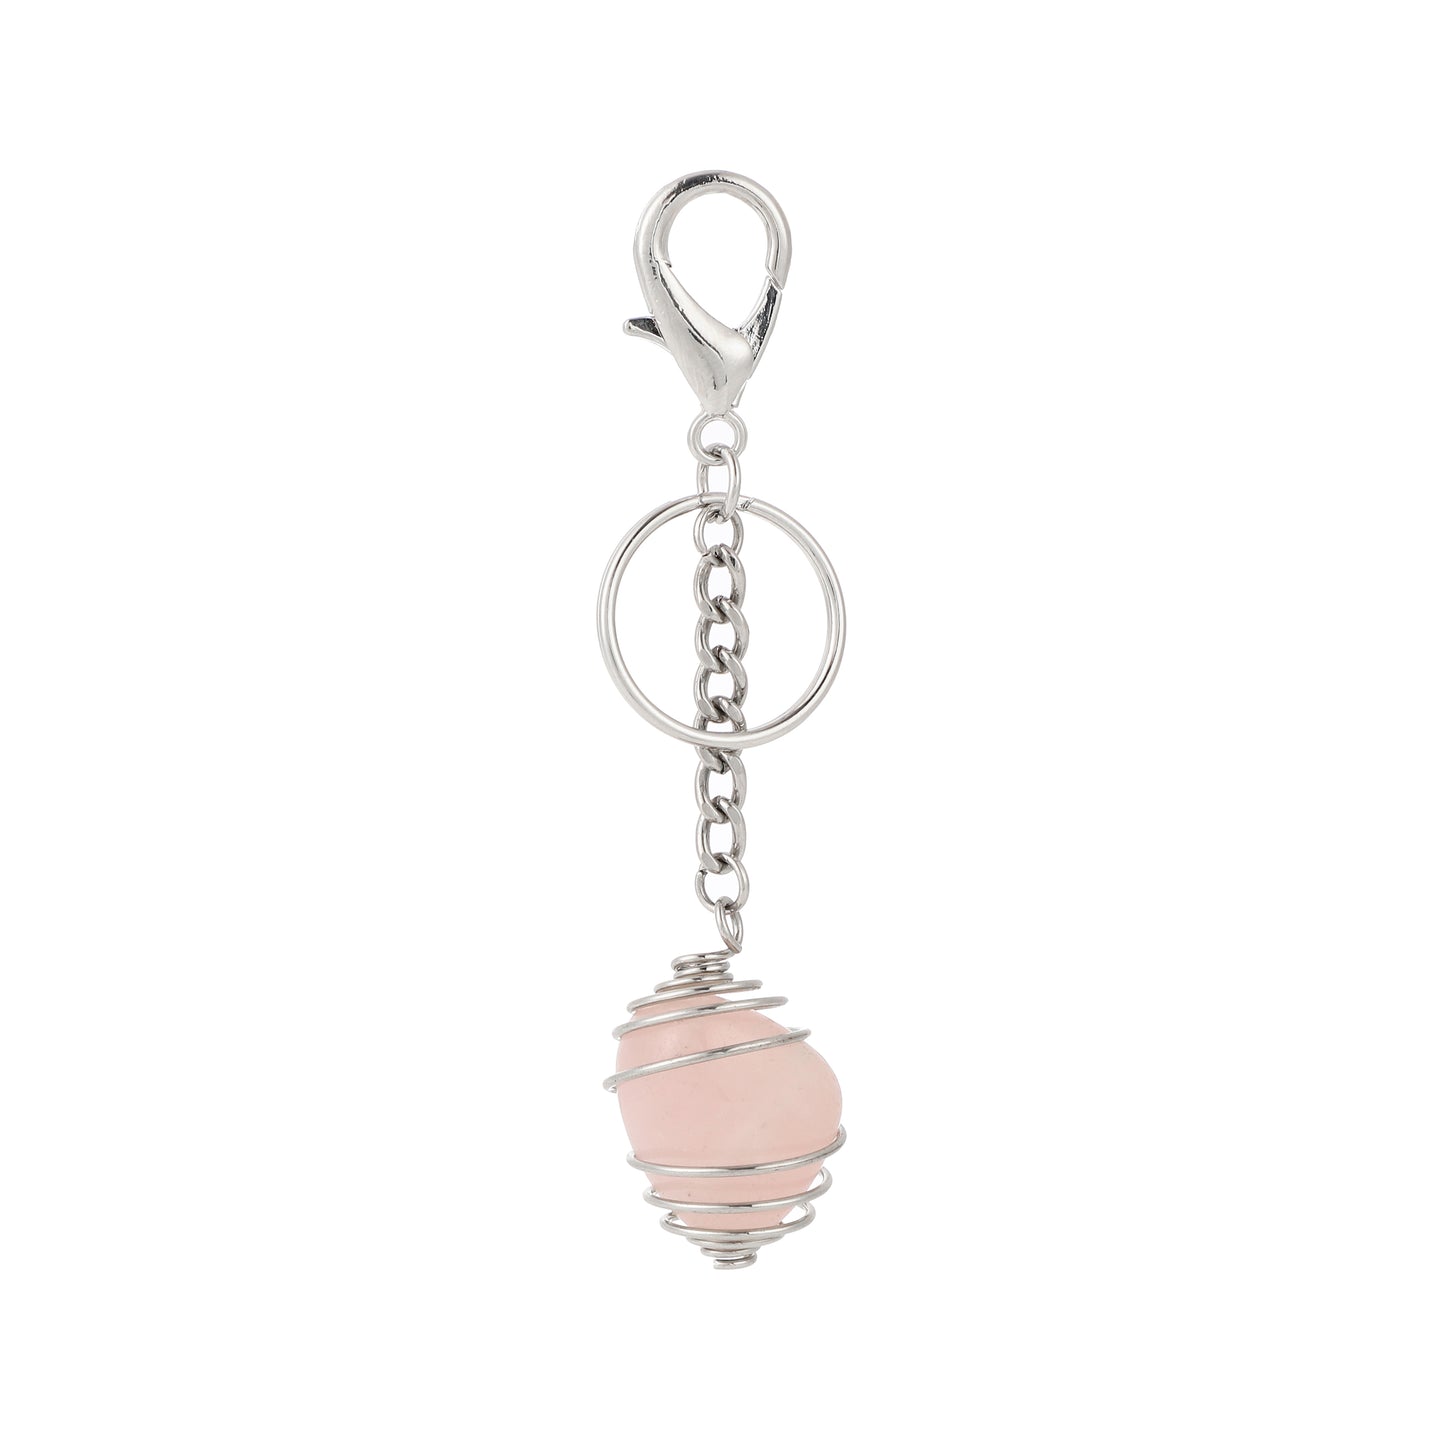 Cage Keychain - Stylish and Functional Accessories for Women and Men